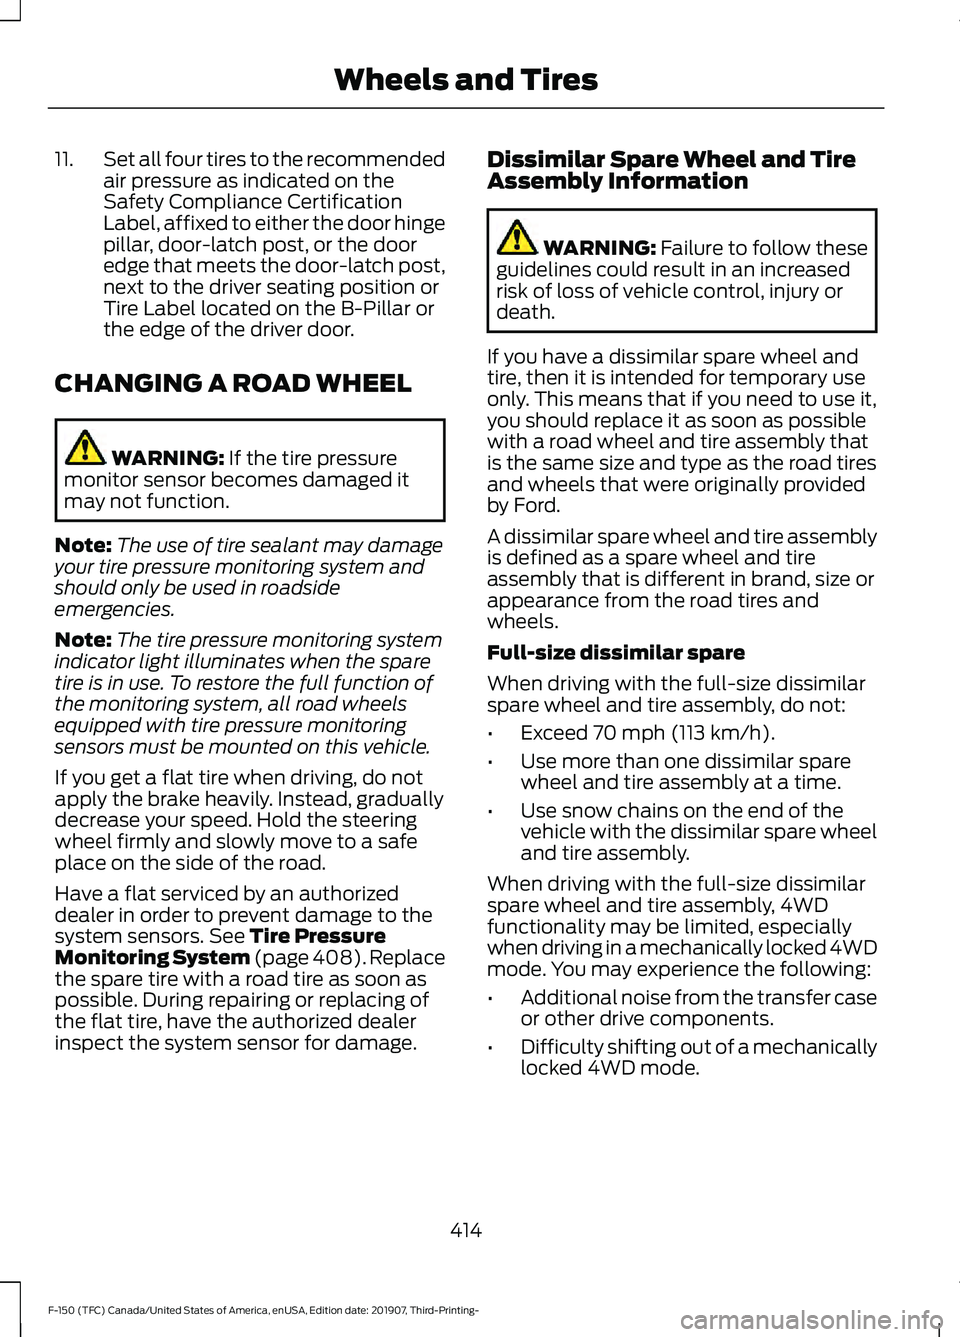 FORD F-150 2020  Owners Manual 11.
Set all four tires to the recommended
air pressure as indicated on the
Safety Compliance Certification
Label, affixed to either the door hinge
pillar, door-latch post, or the door
edge that meets 